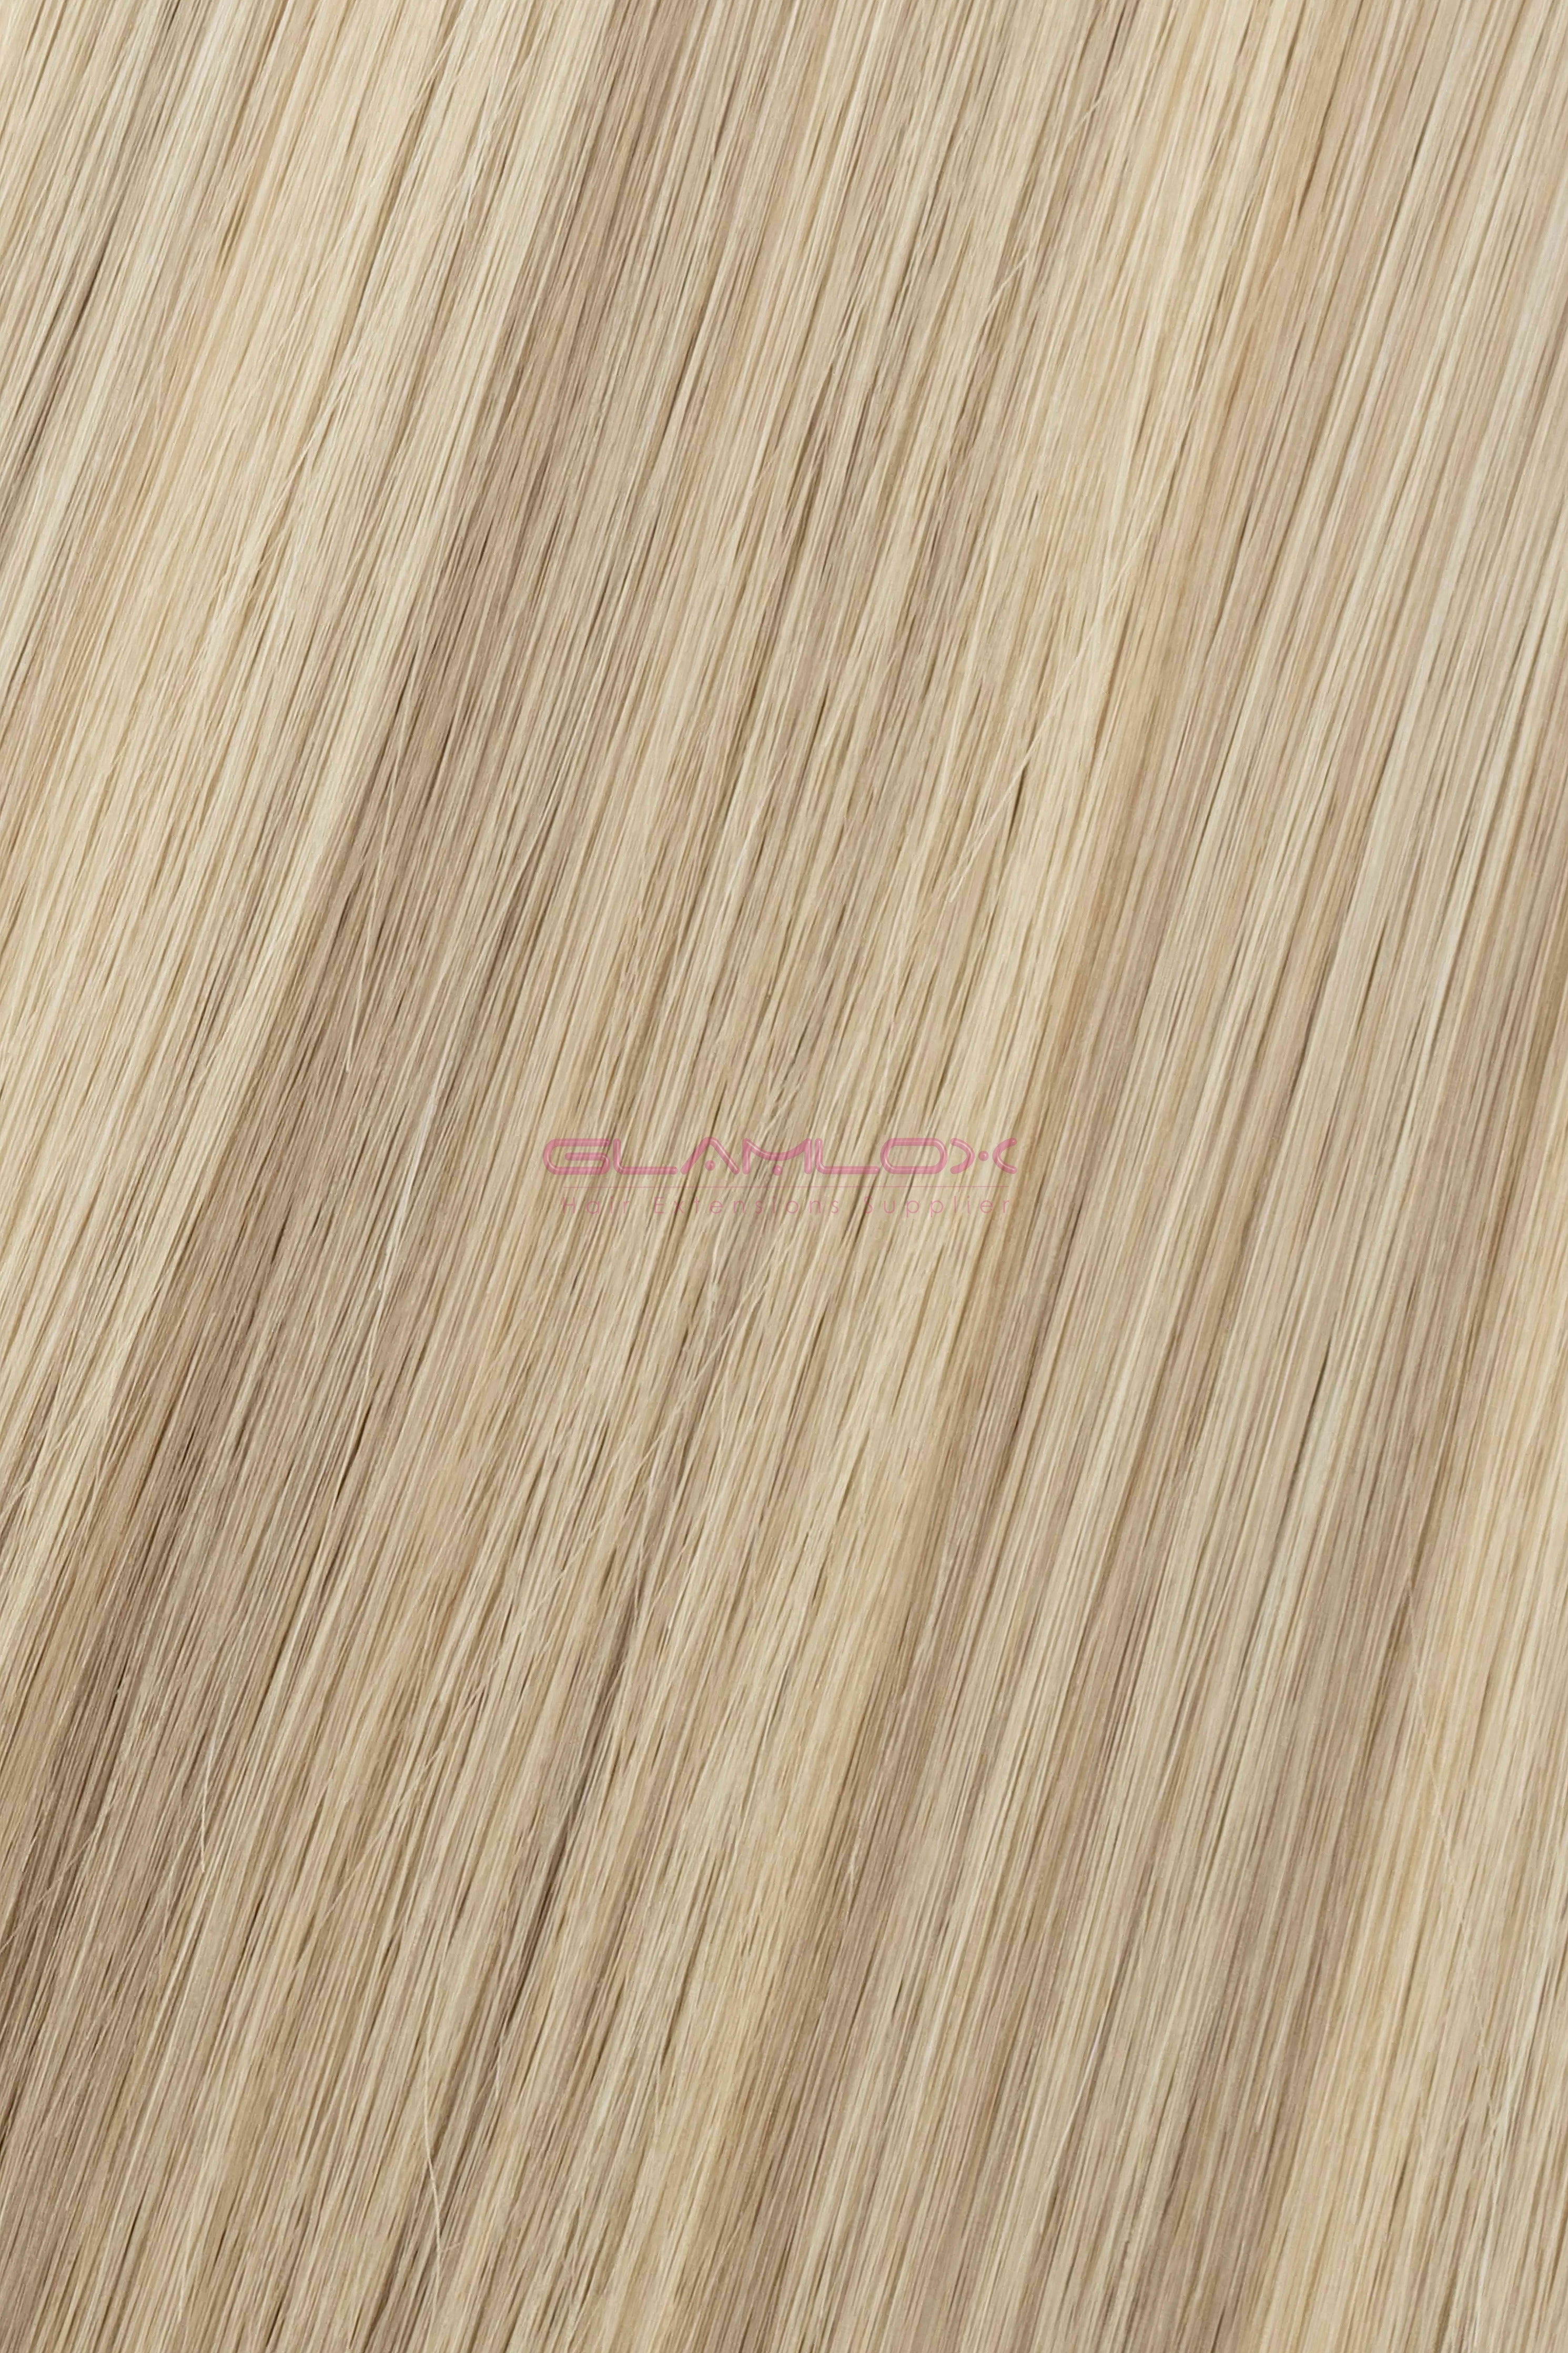 20"-22" Nano Ring Hair Extensions - Russian Mongolian Double Drawn Remy Human Hair - 100 Strands